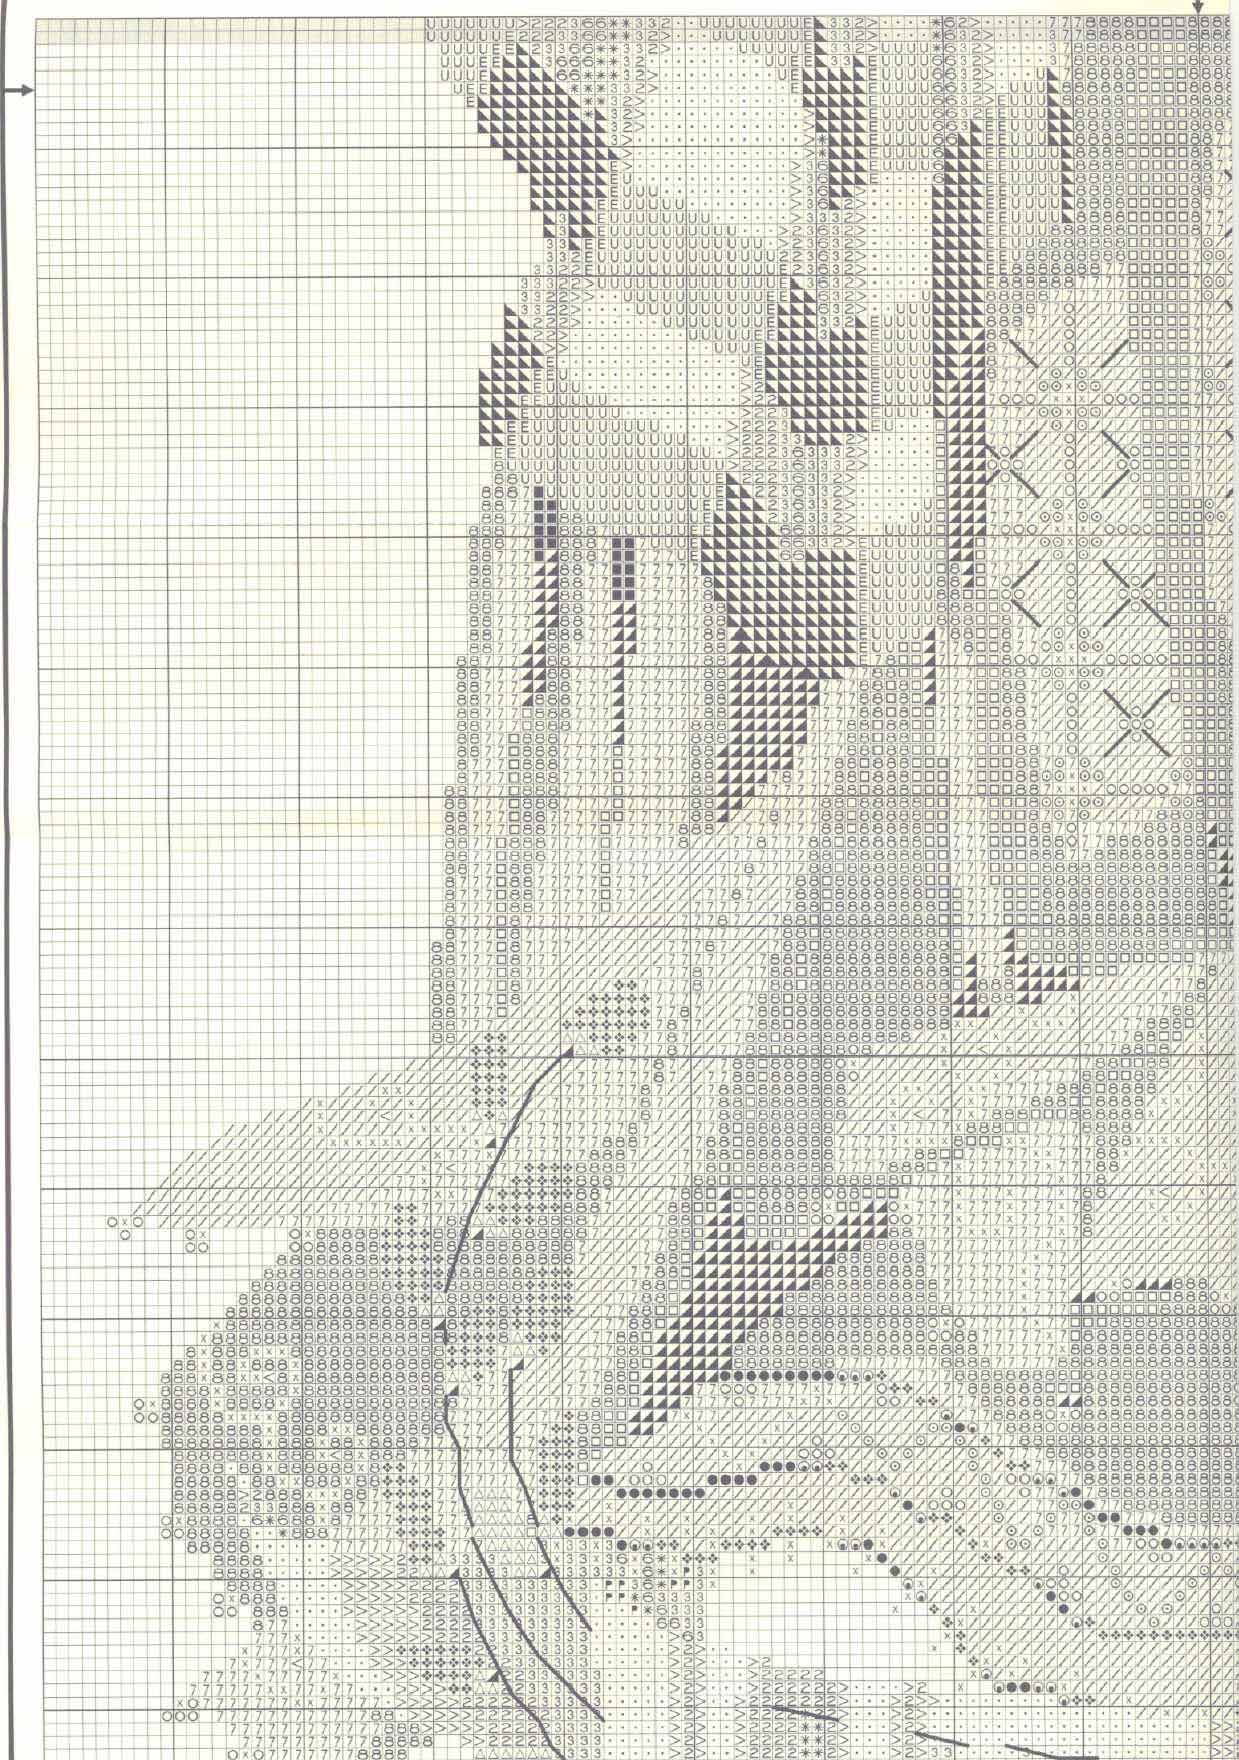 Index of /stitch/schemes/cd1/Mirabilia/#62 The Lady of the Flag.